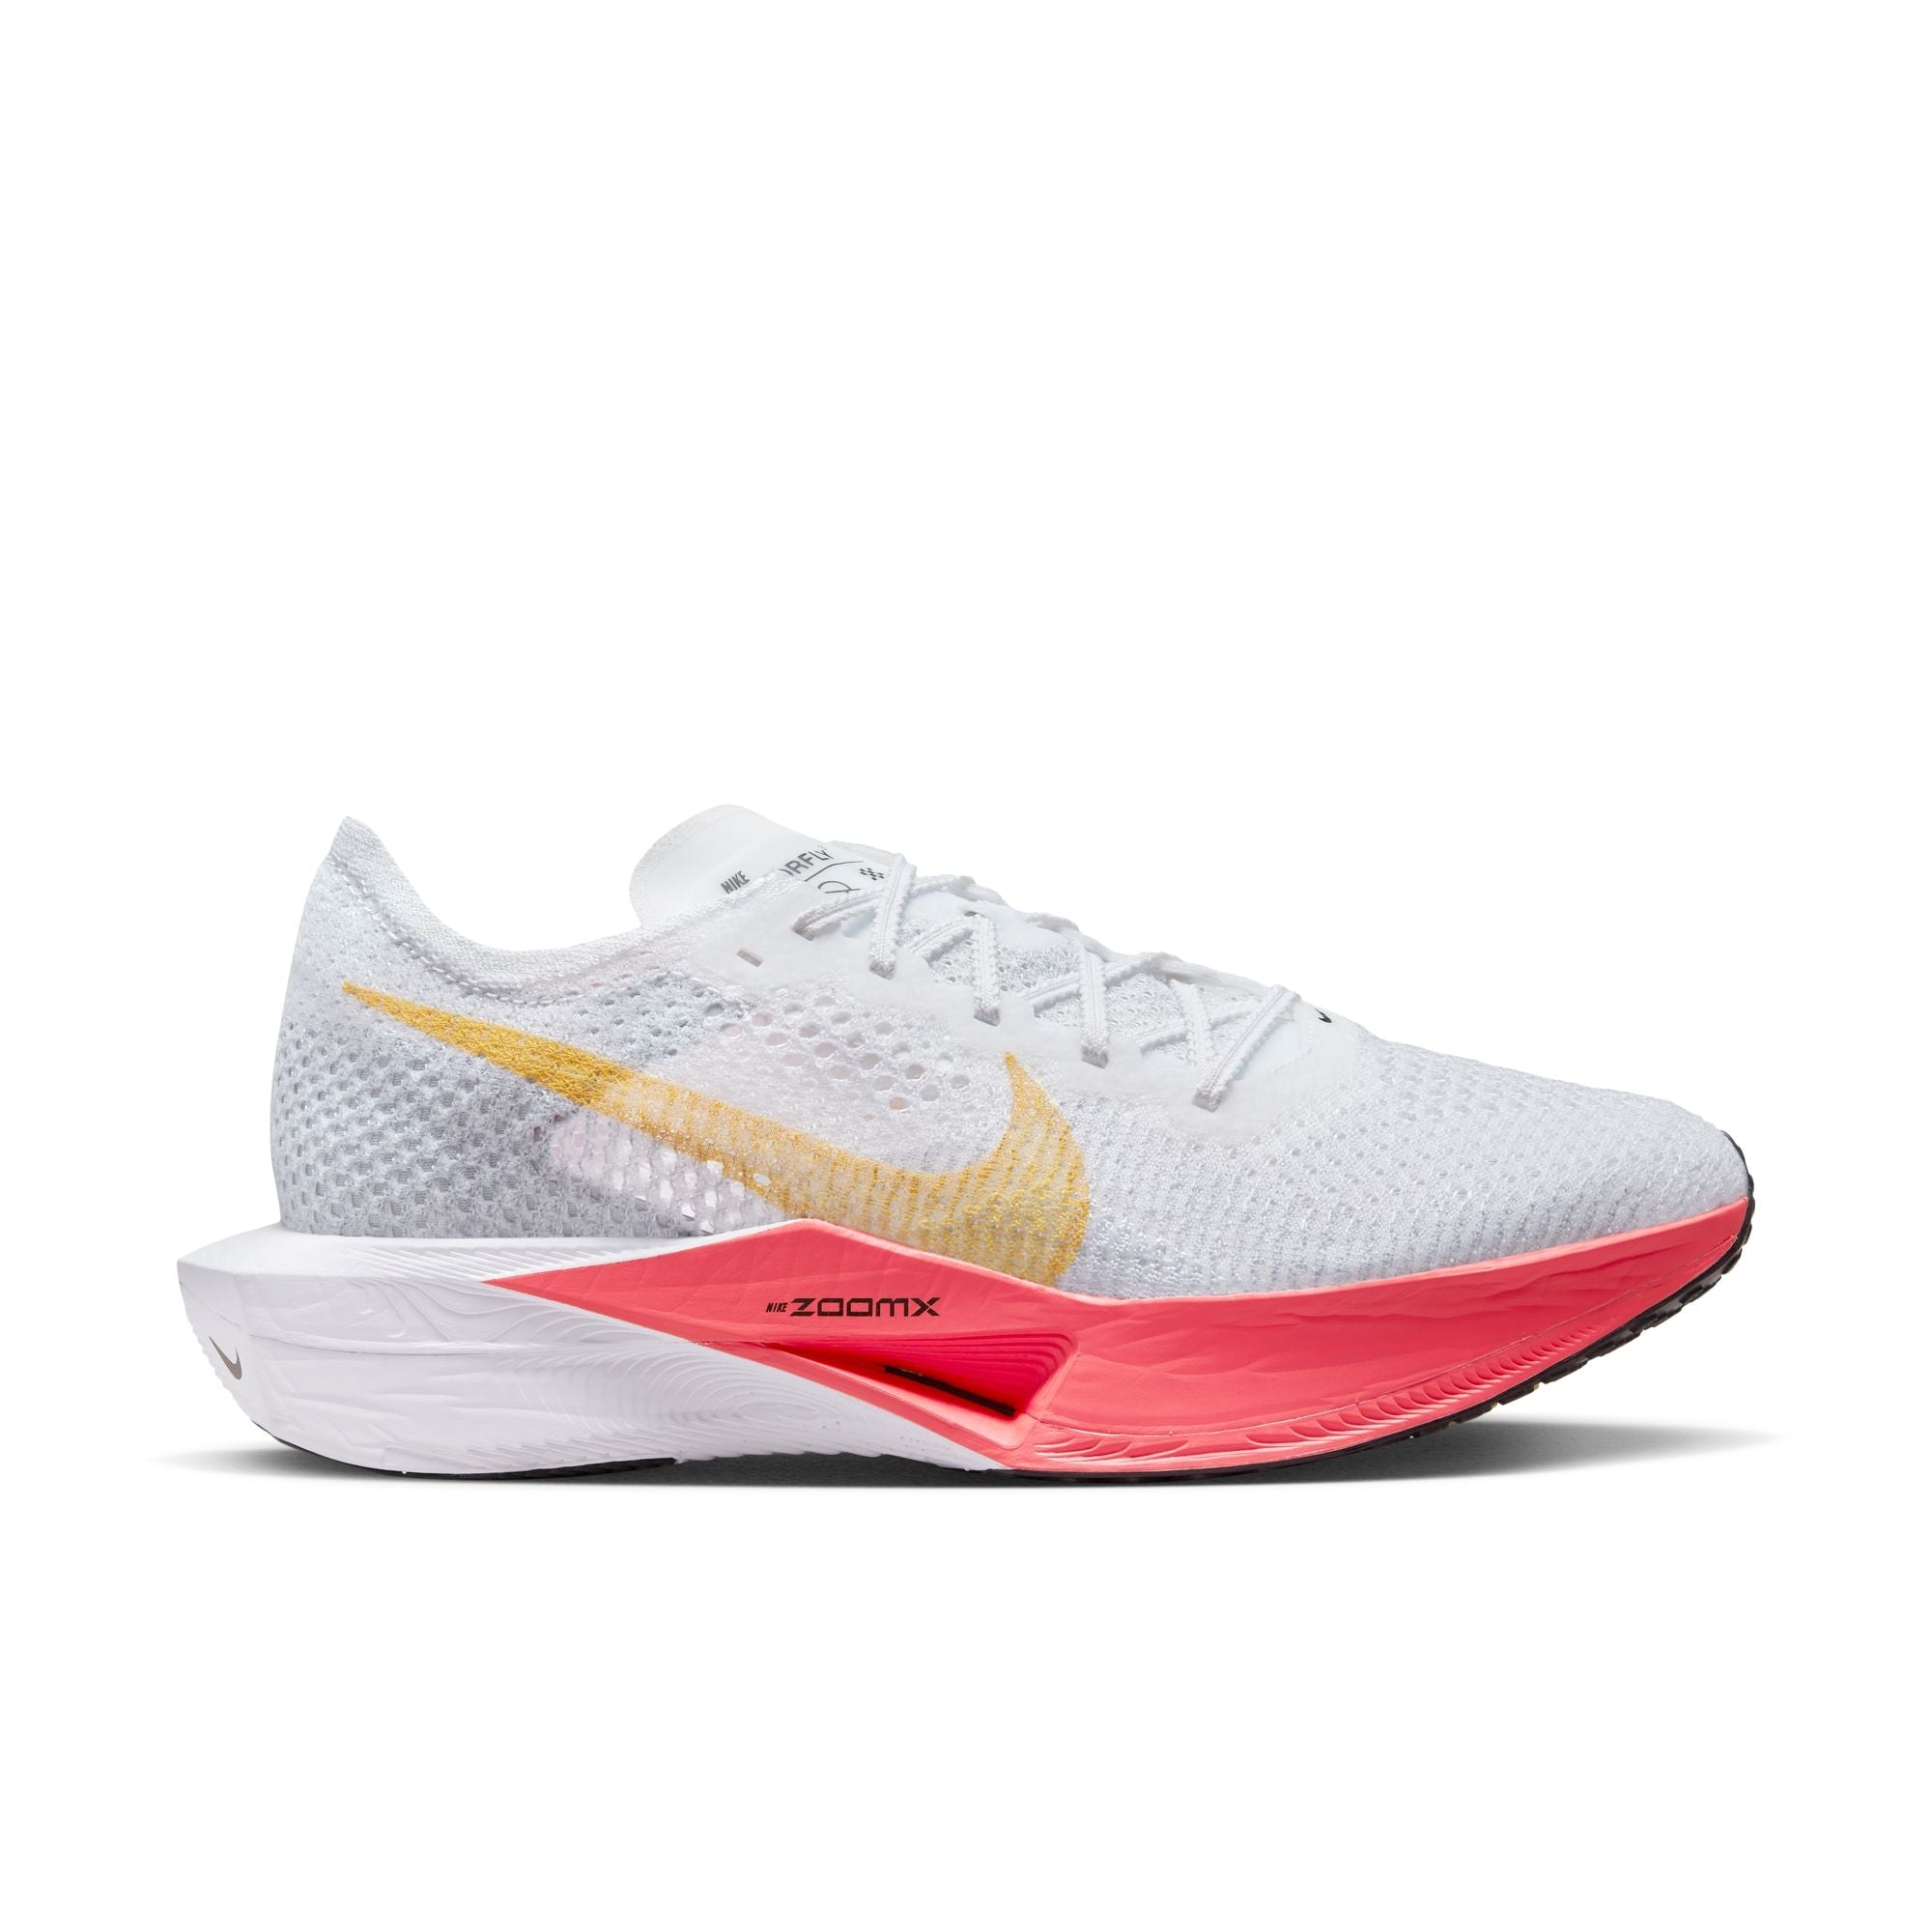 Nike ZoomX Vaporfly Next% 3 Womens FOOTWEAR - Womens Carbon Plate WHITE/SEA CORAL/TOPAZ GOLD